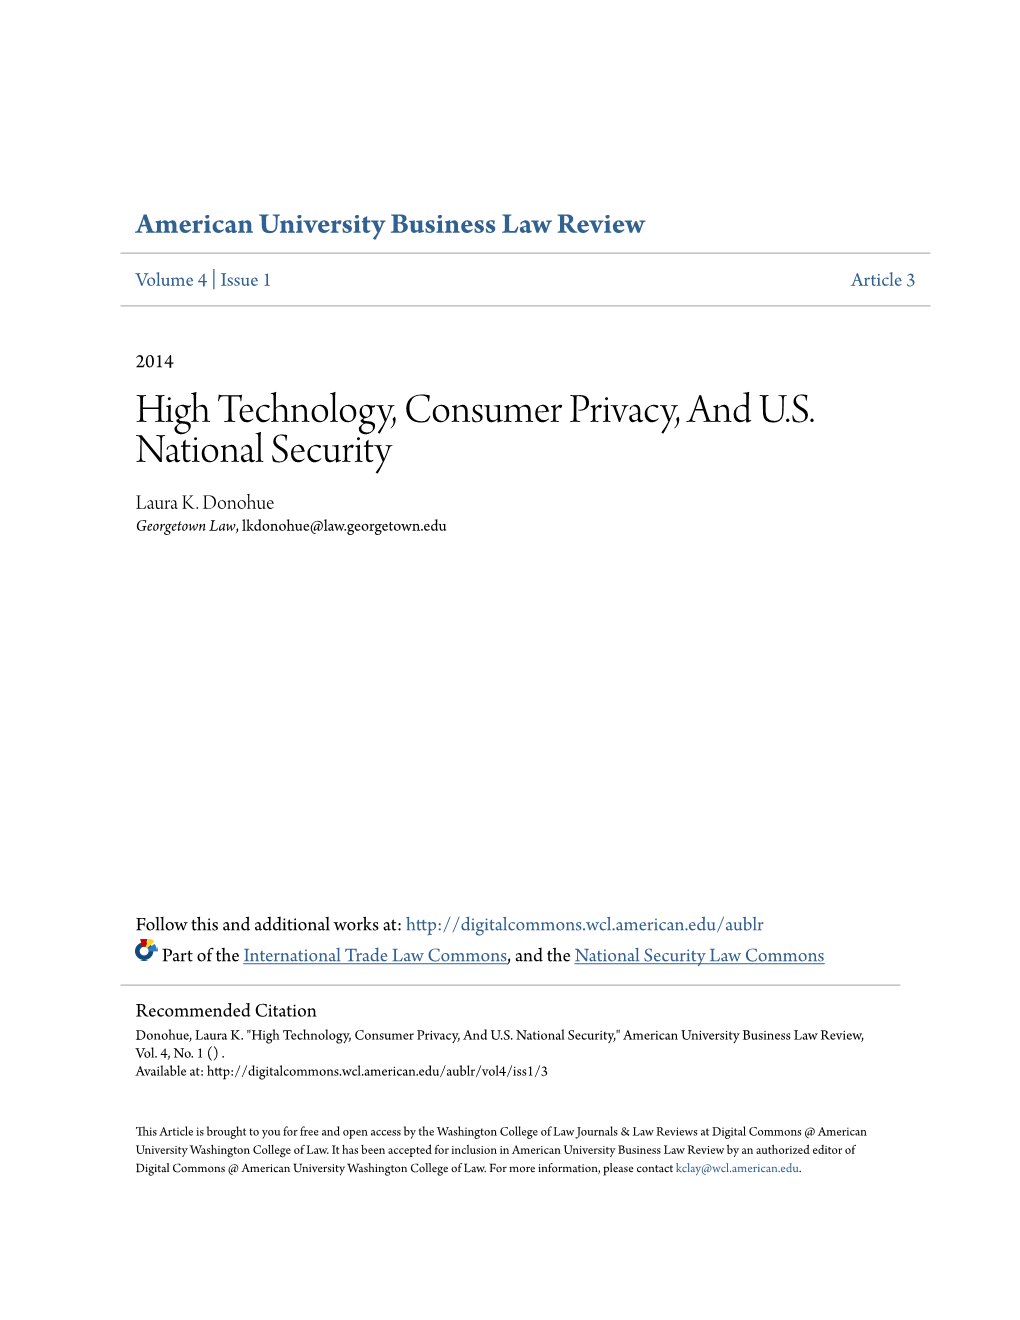 High Technology, Consumer Privacy, and U.S. National Security Laura K